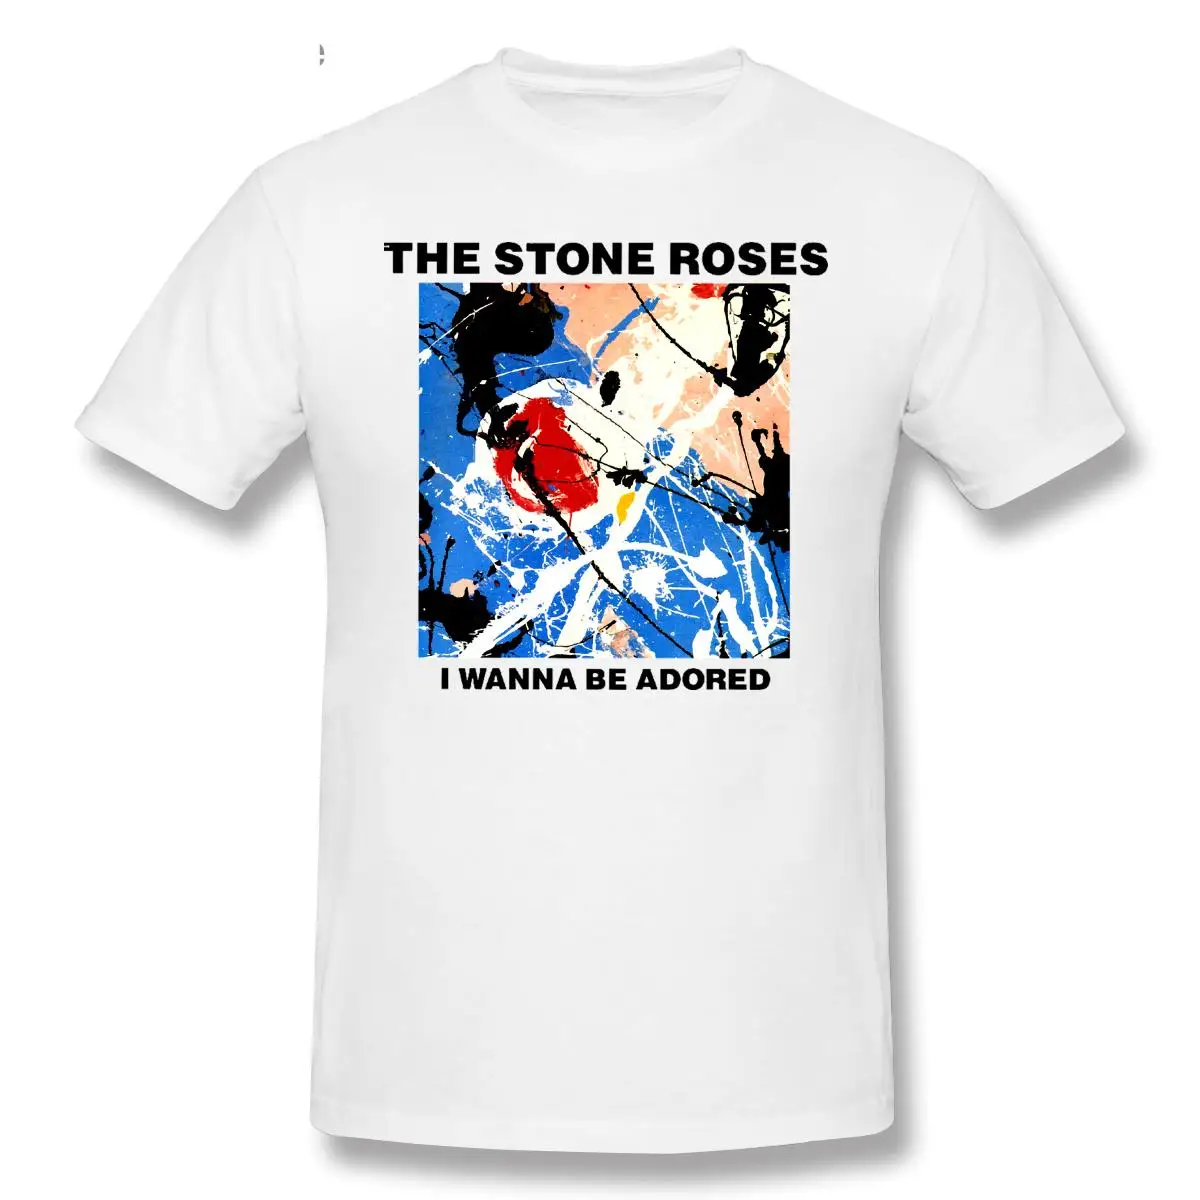 

2021 Fashion Graphic Tshirts Cartoon Anime The Stone Roses I Wanna Be Adored T Shirts Casual Men 100% Cotton T-shirts Tees Top